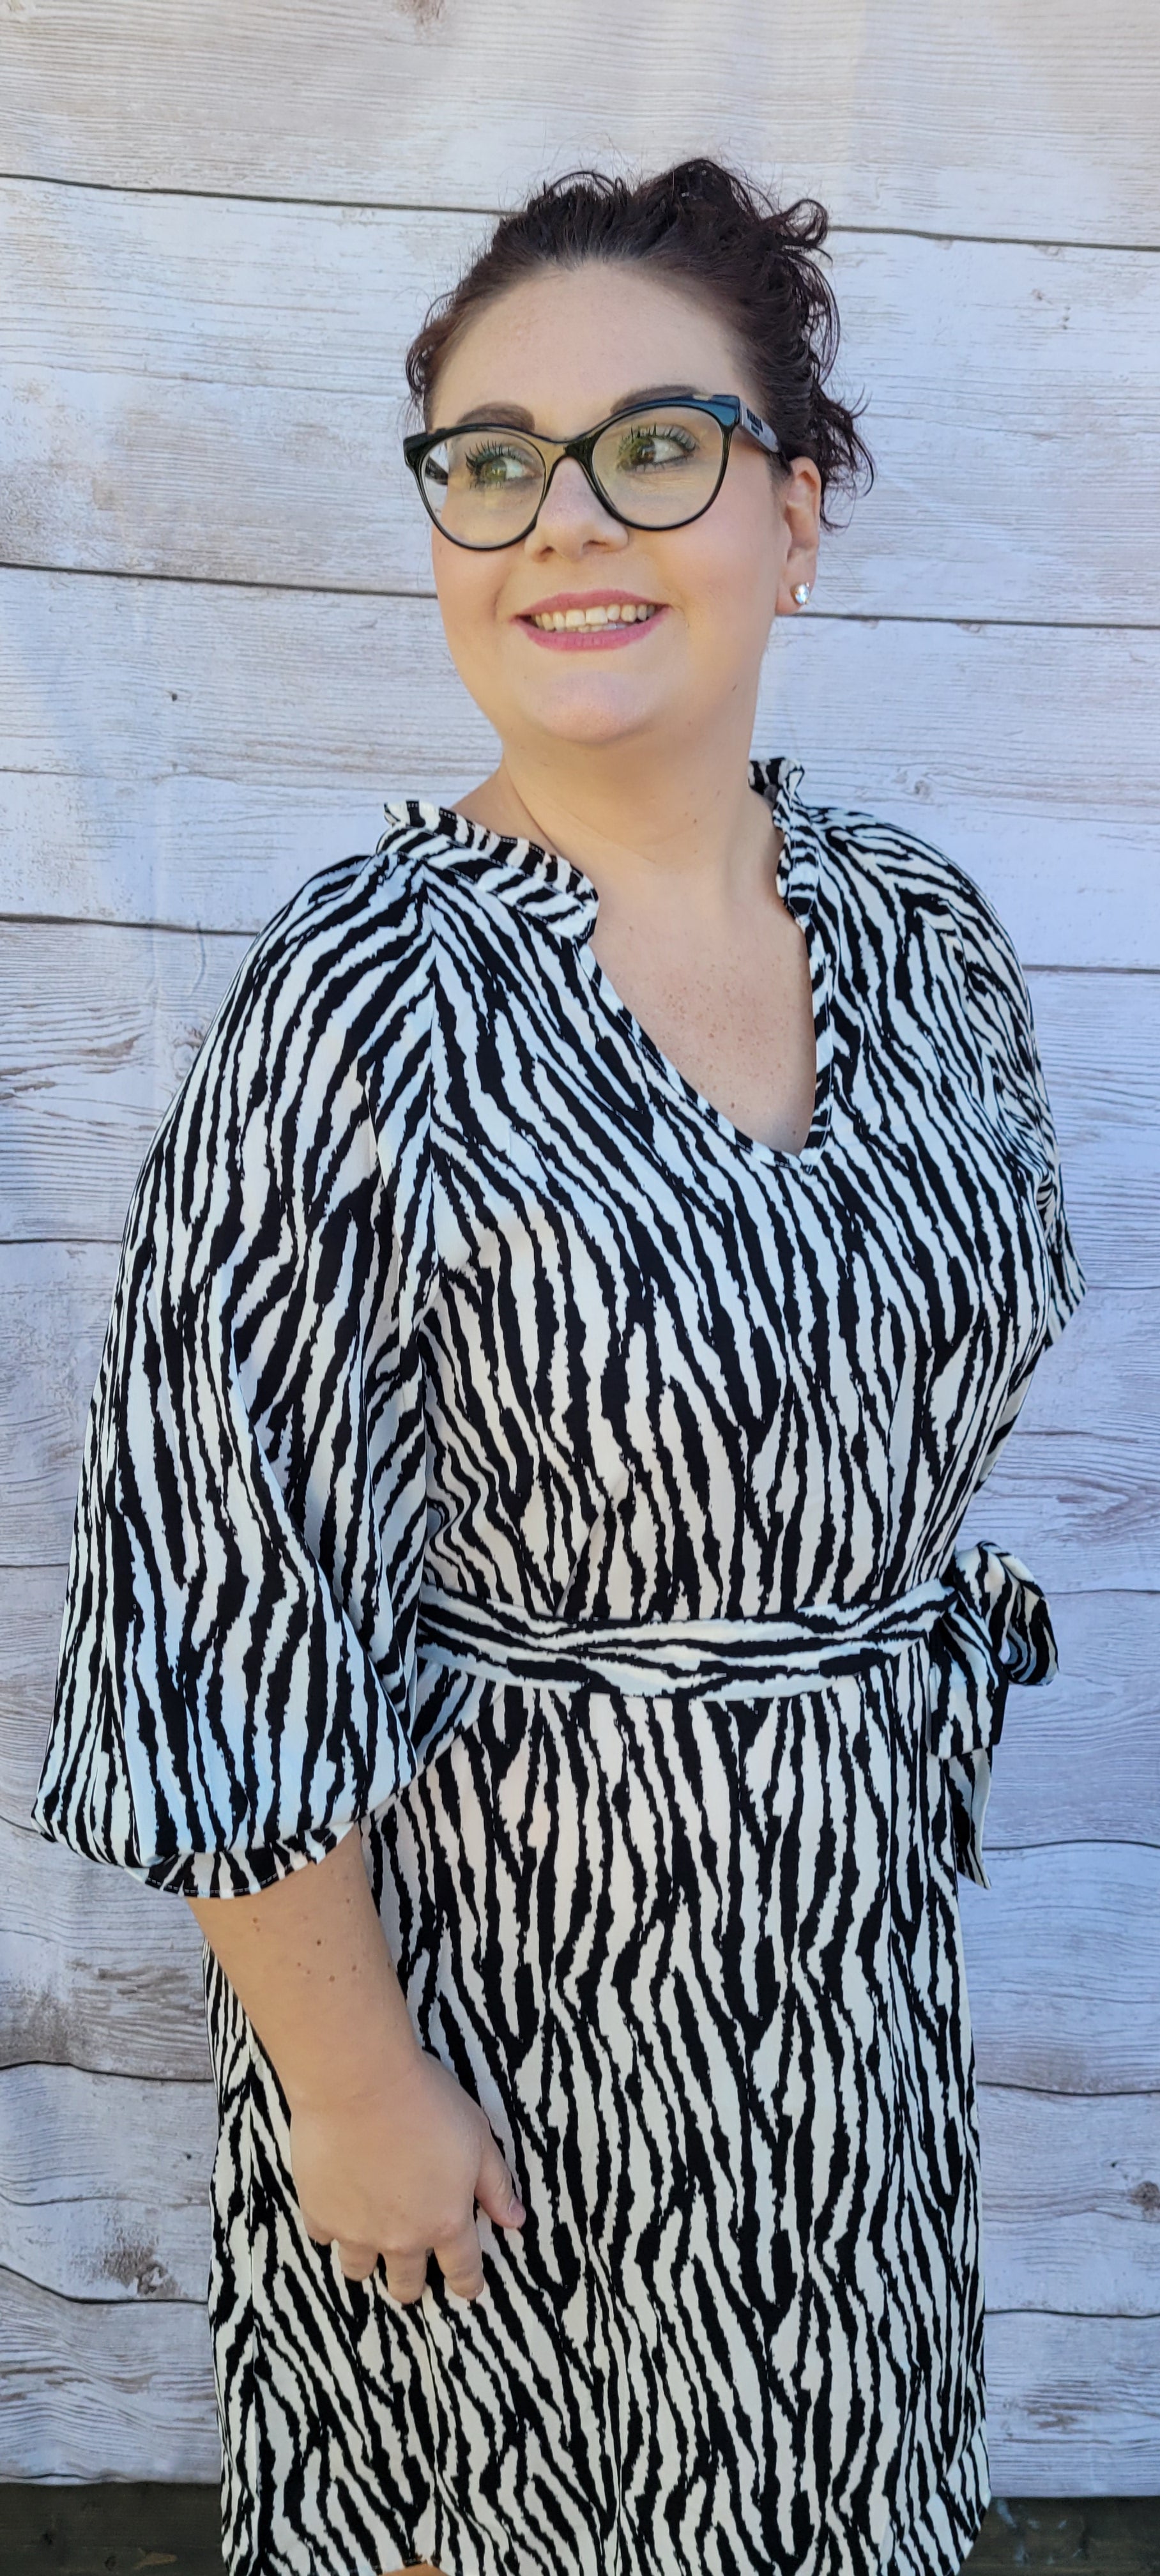 Get in touch with your bold and wild side! This dress is classy, sassy, and badassy! Colors are black and off white. This zebra print dress features a ruffle collar, ¾ balloon sleeves with ruffles, waist tie, v-neck, and sits below the knees. Good for a night out with the girls, office or business attire. Don’t be afraid to get creative!